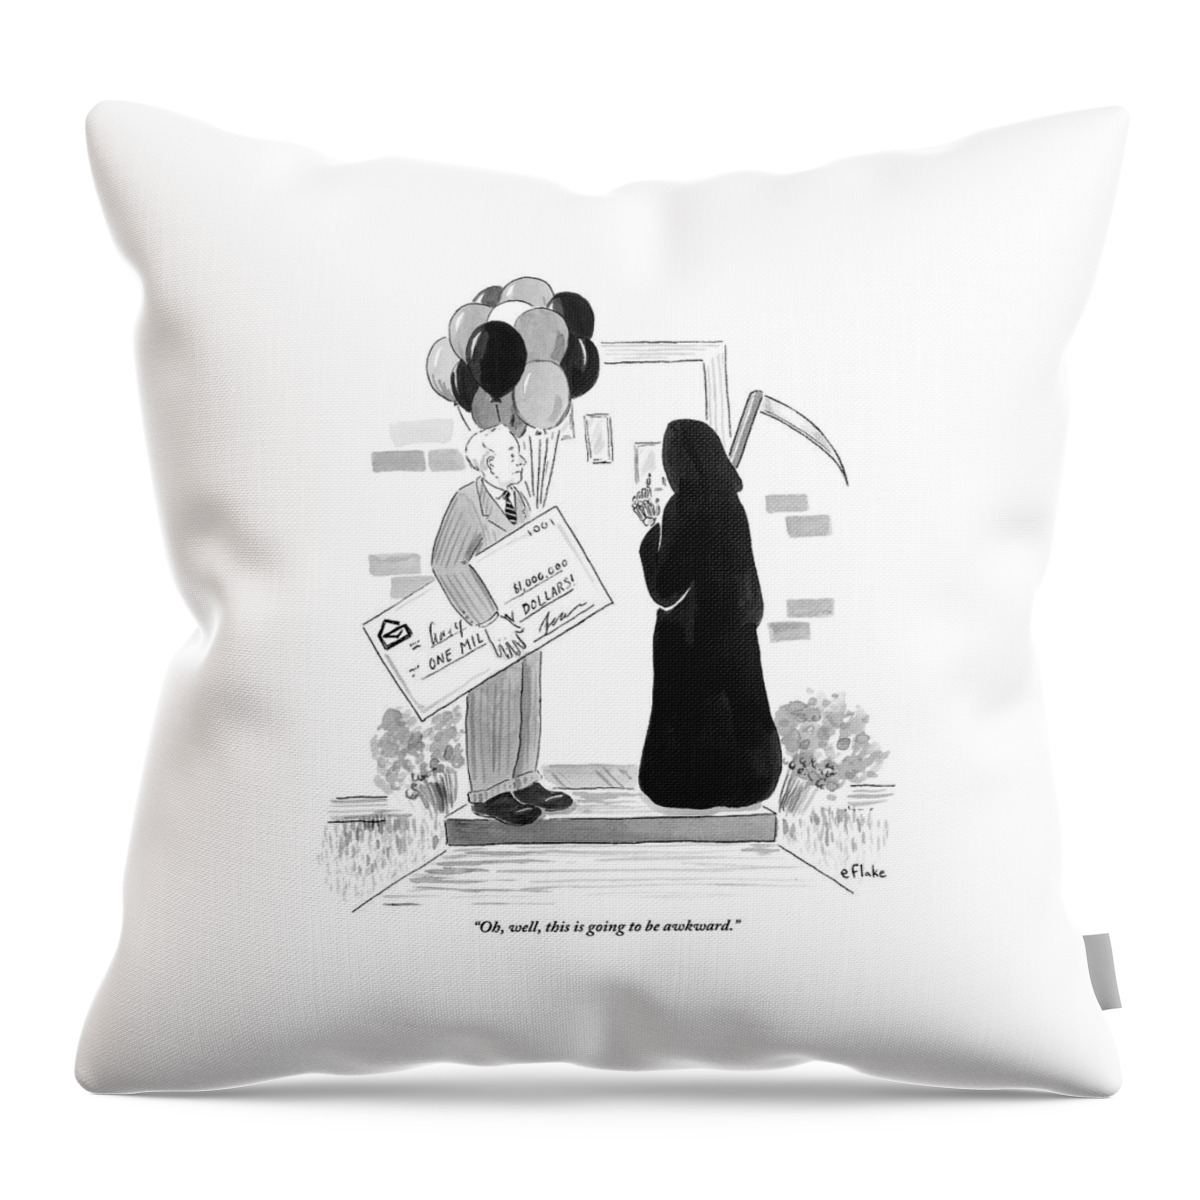 The Grim Reaper Rings A Doorbell At The Same Time Throw Pillow